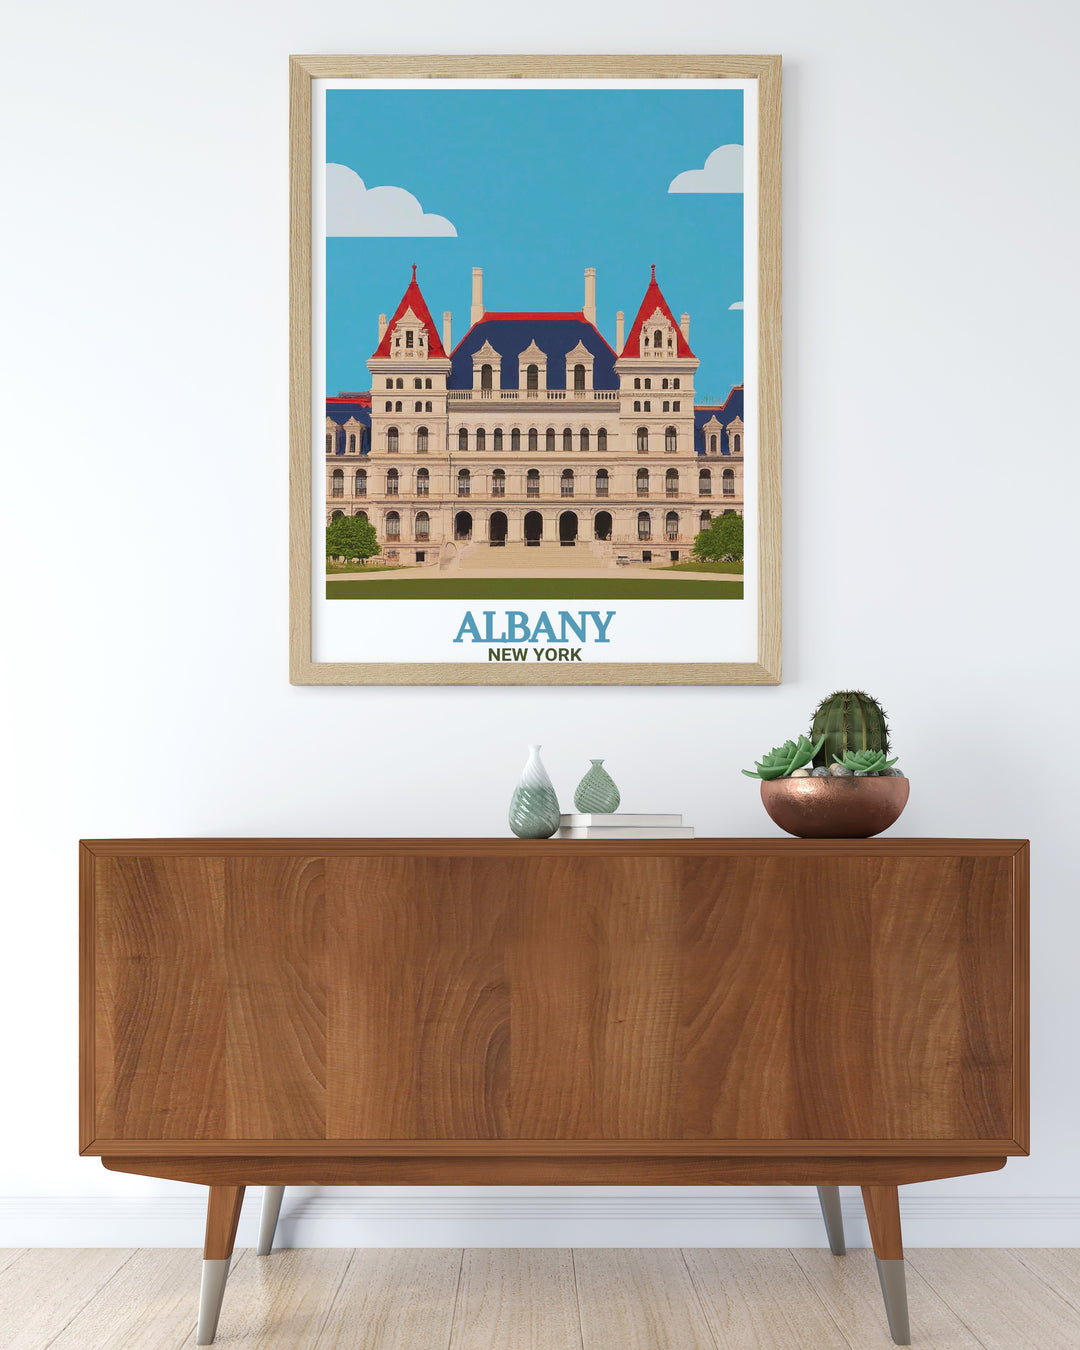 Vibrant New York State Capitol poster capturing the architectural grandeur and cultural significance of Albany making it a perfect addition to any collection of New York State prints and art collectibles suitable for modern and vintage decor styles.